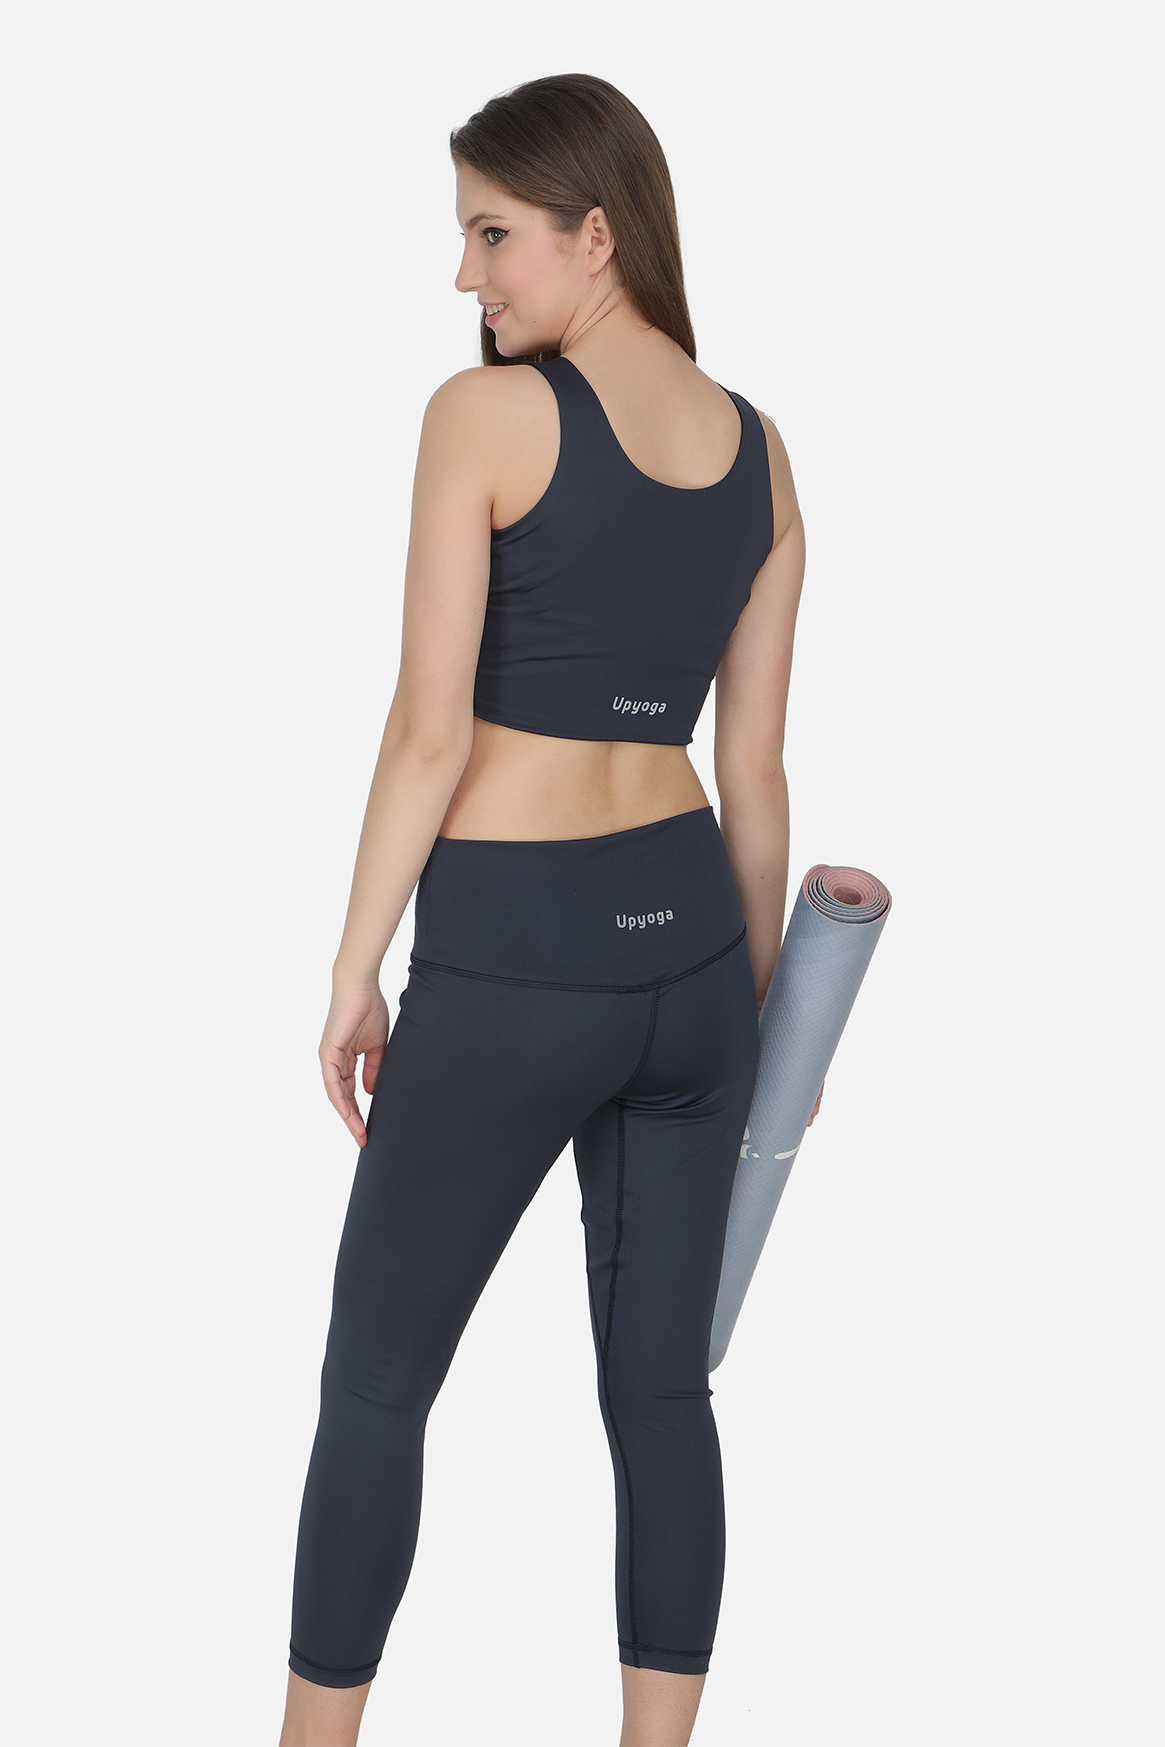 High Waist Hollow Out High Rise Yoga Leggings For Women Breathable Calf  Length Leggings For Outdoor Running, Gym, Fitness And Workout H1221 From  Mengyang10, $11.78